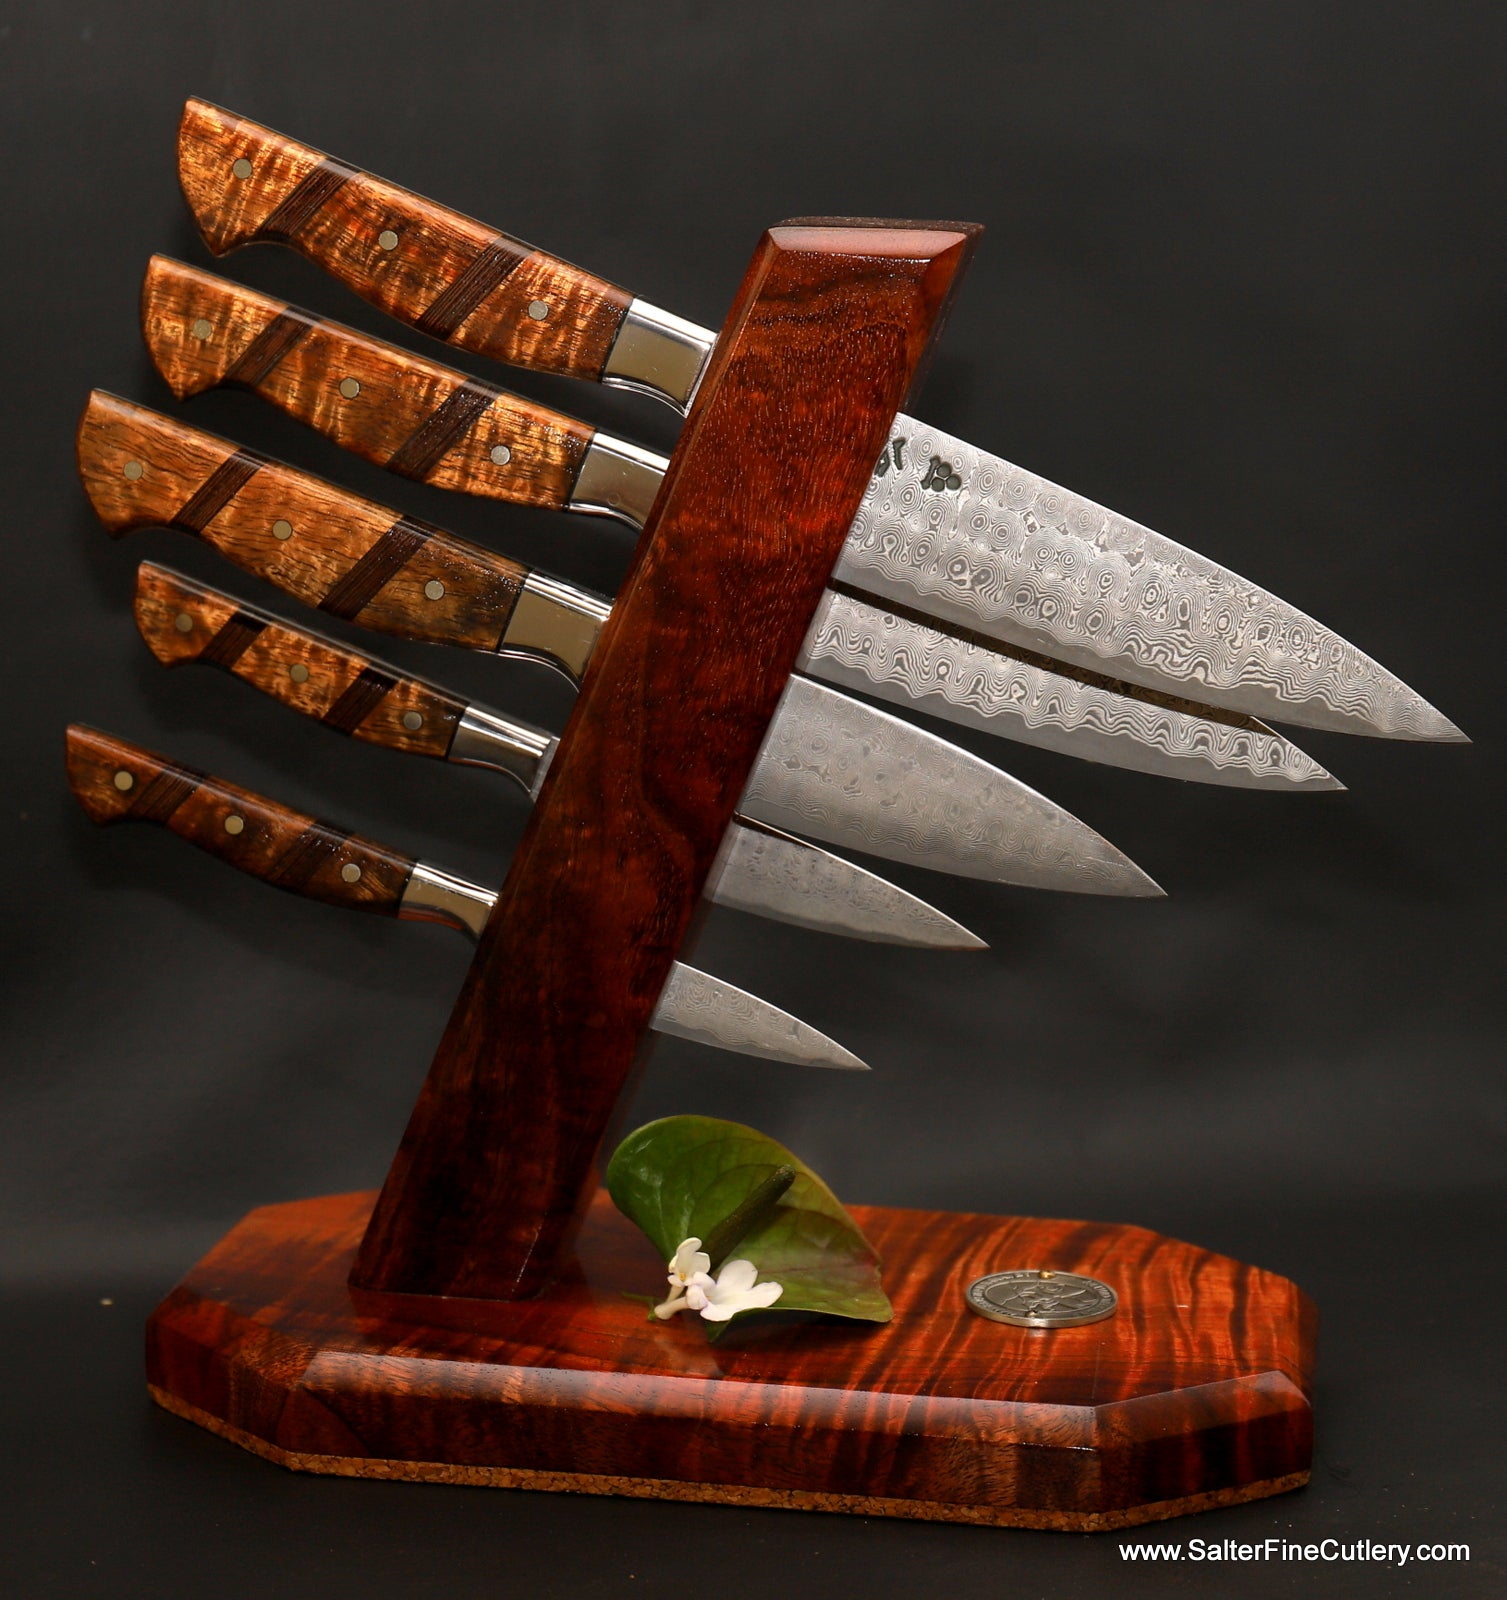 5-piece chef knife set featuring our full tang "western-style' handles with custom decorative accents and tower stand by Salter Fine Cutlery